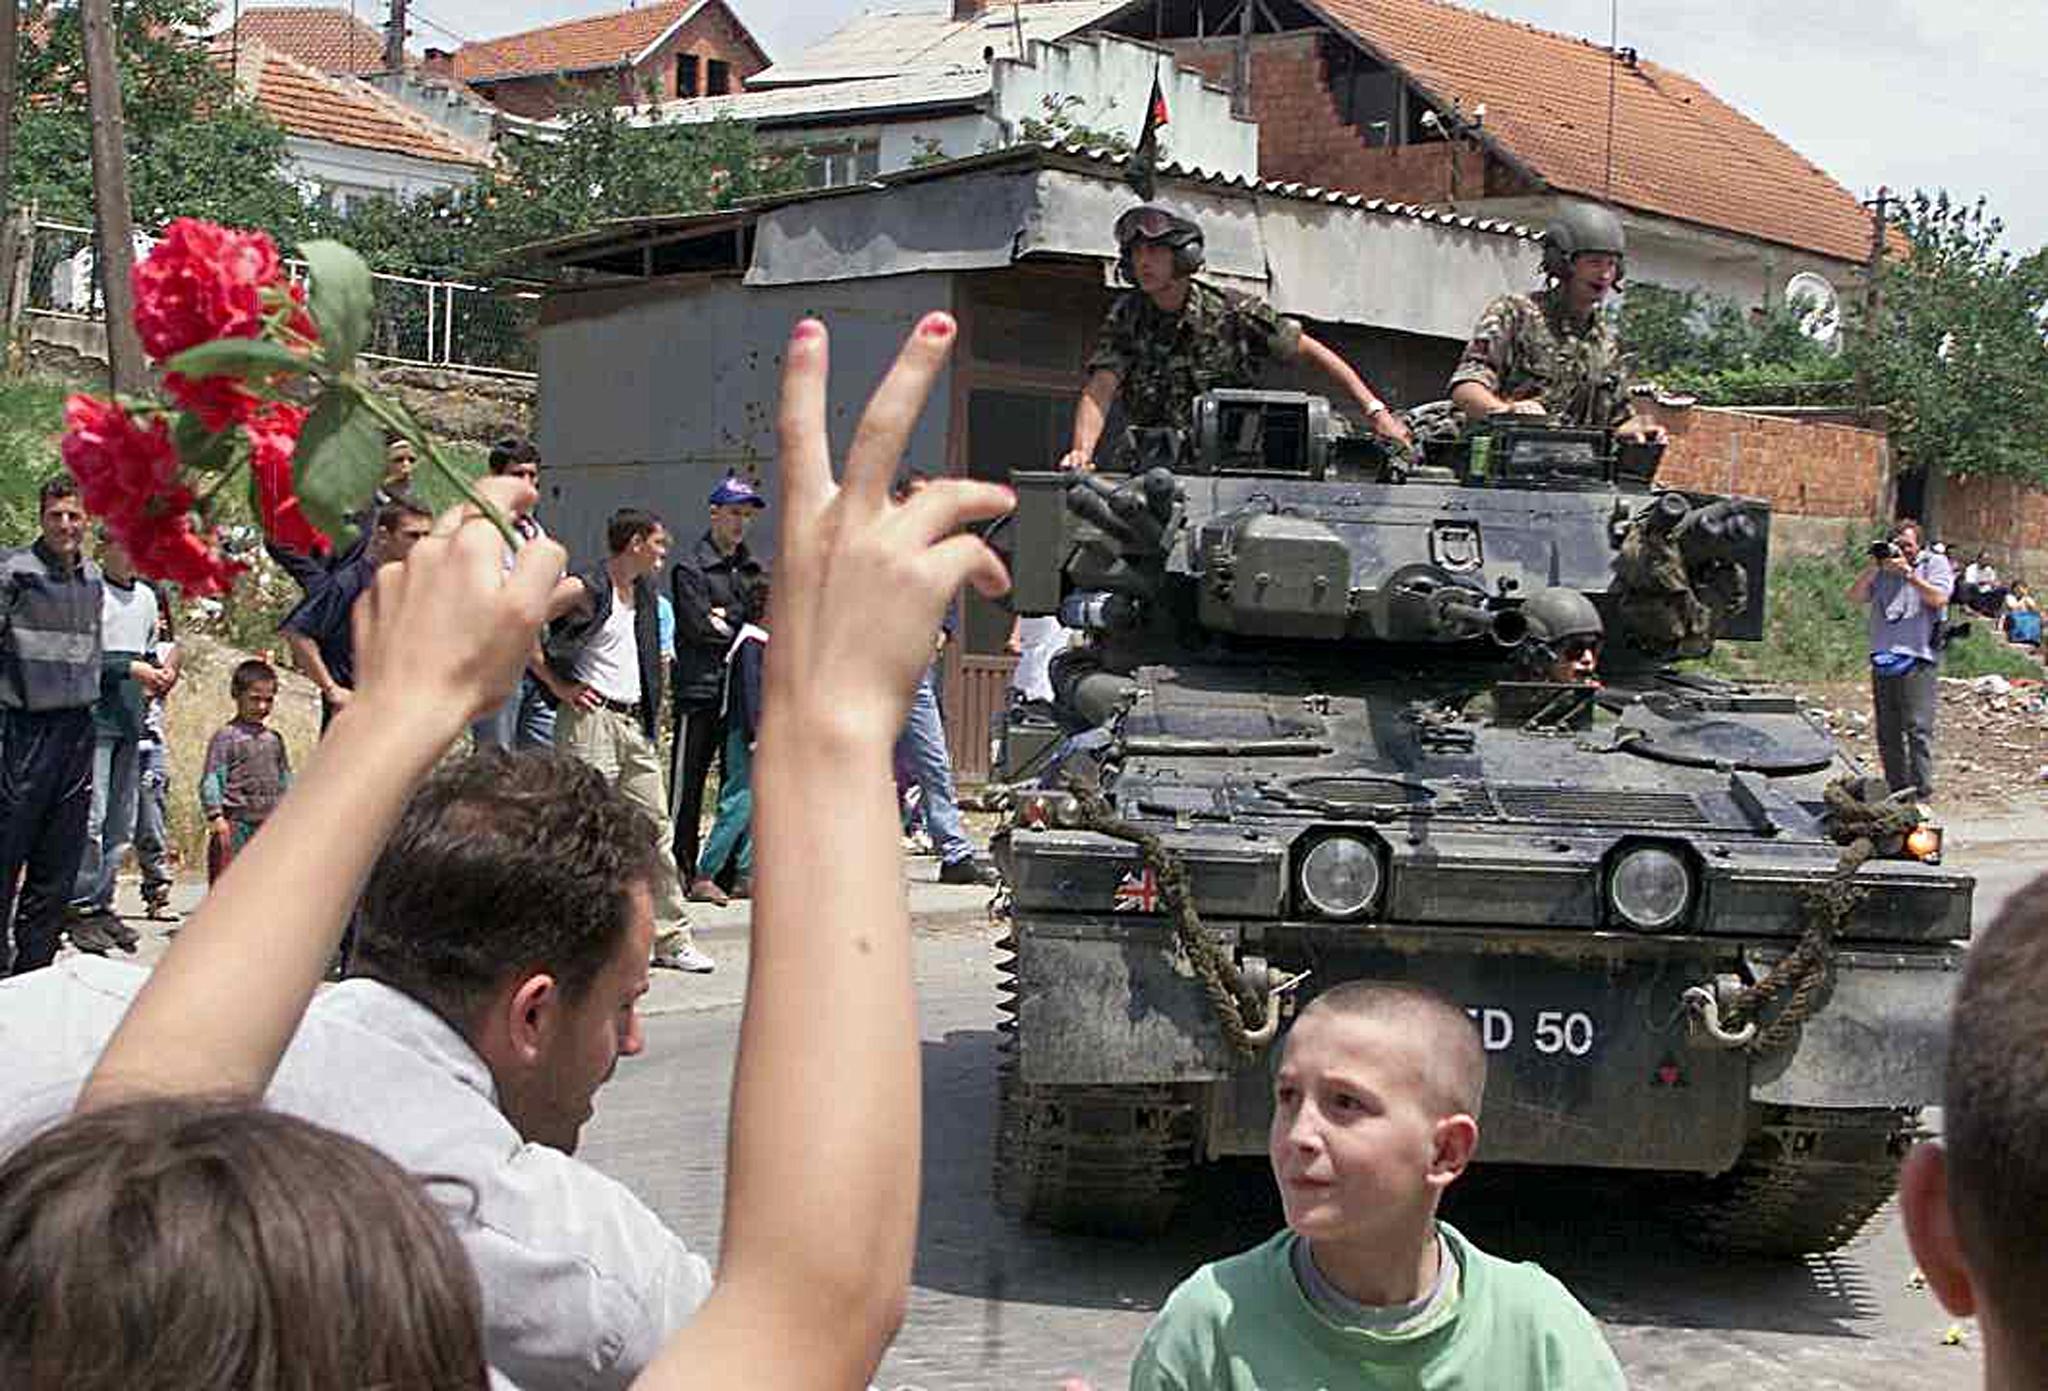 Ethnic Albanian people flash the victory sign and celebrate in front of a British Nato tank, its gun barrel decorated with flowers, as the first Nato troops are deployed in Kosovo’s capital Pristina, 13 June 1999